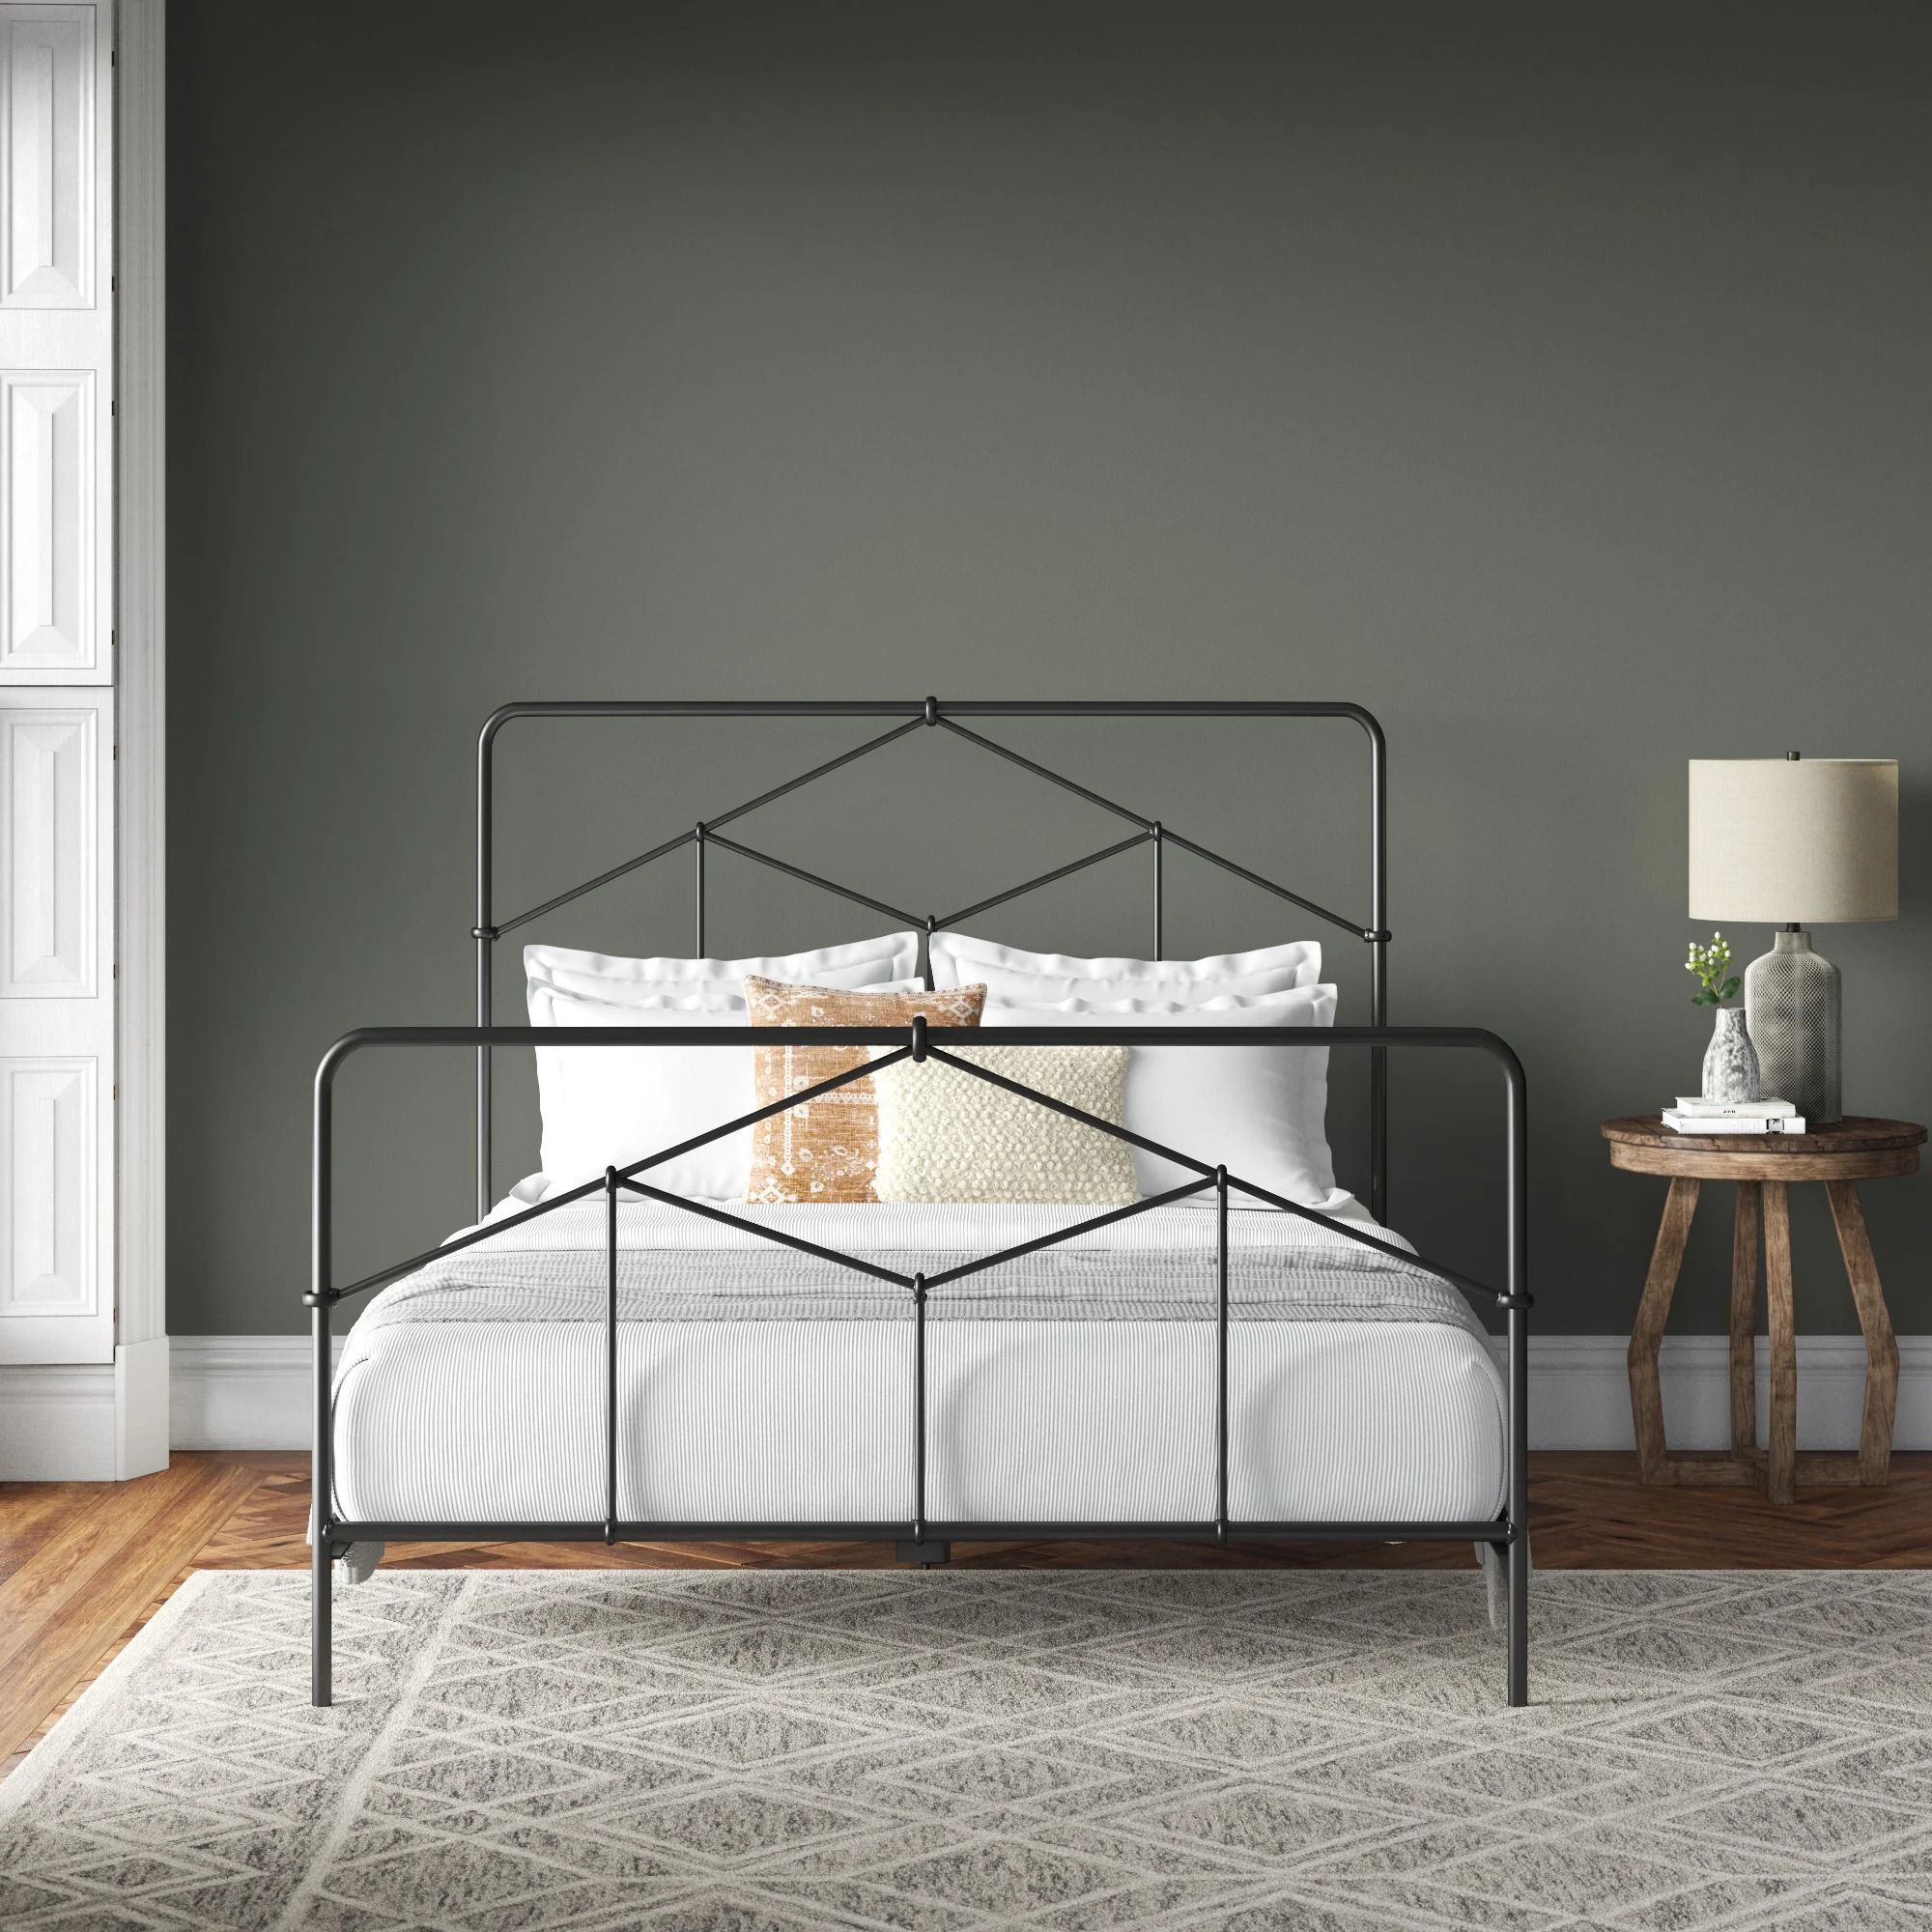 10 Best Box Spring Bed Frames Beds, Bed Frame That Does Not Need A Boxspring